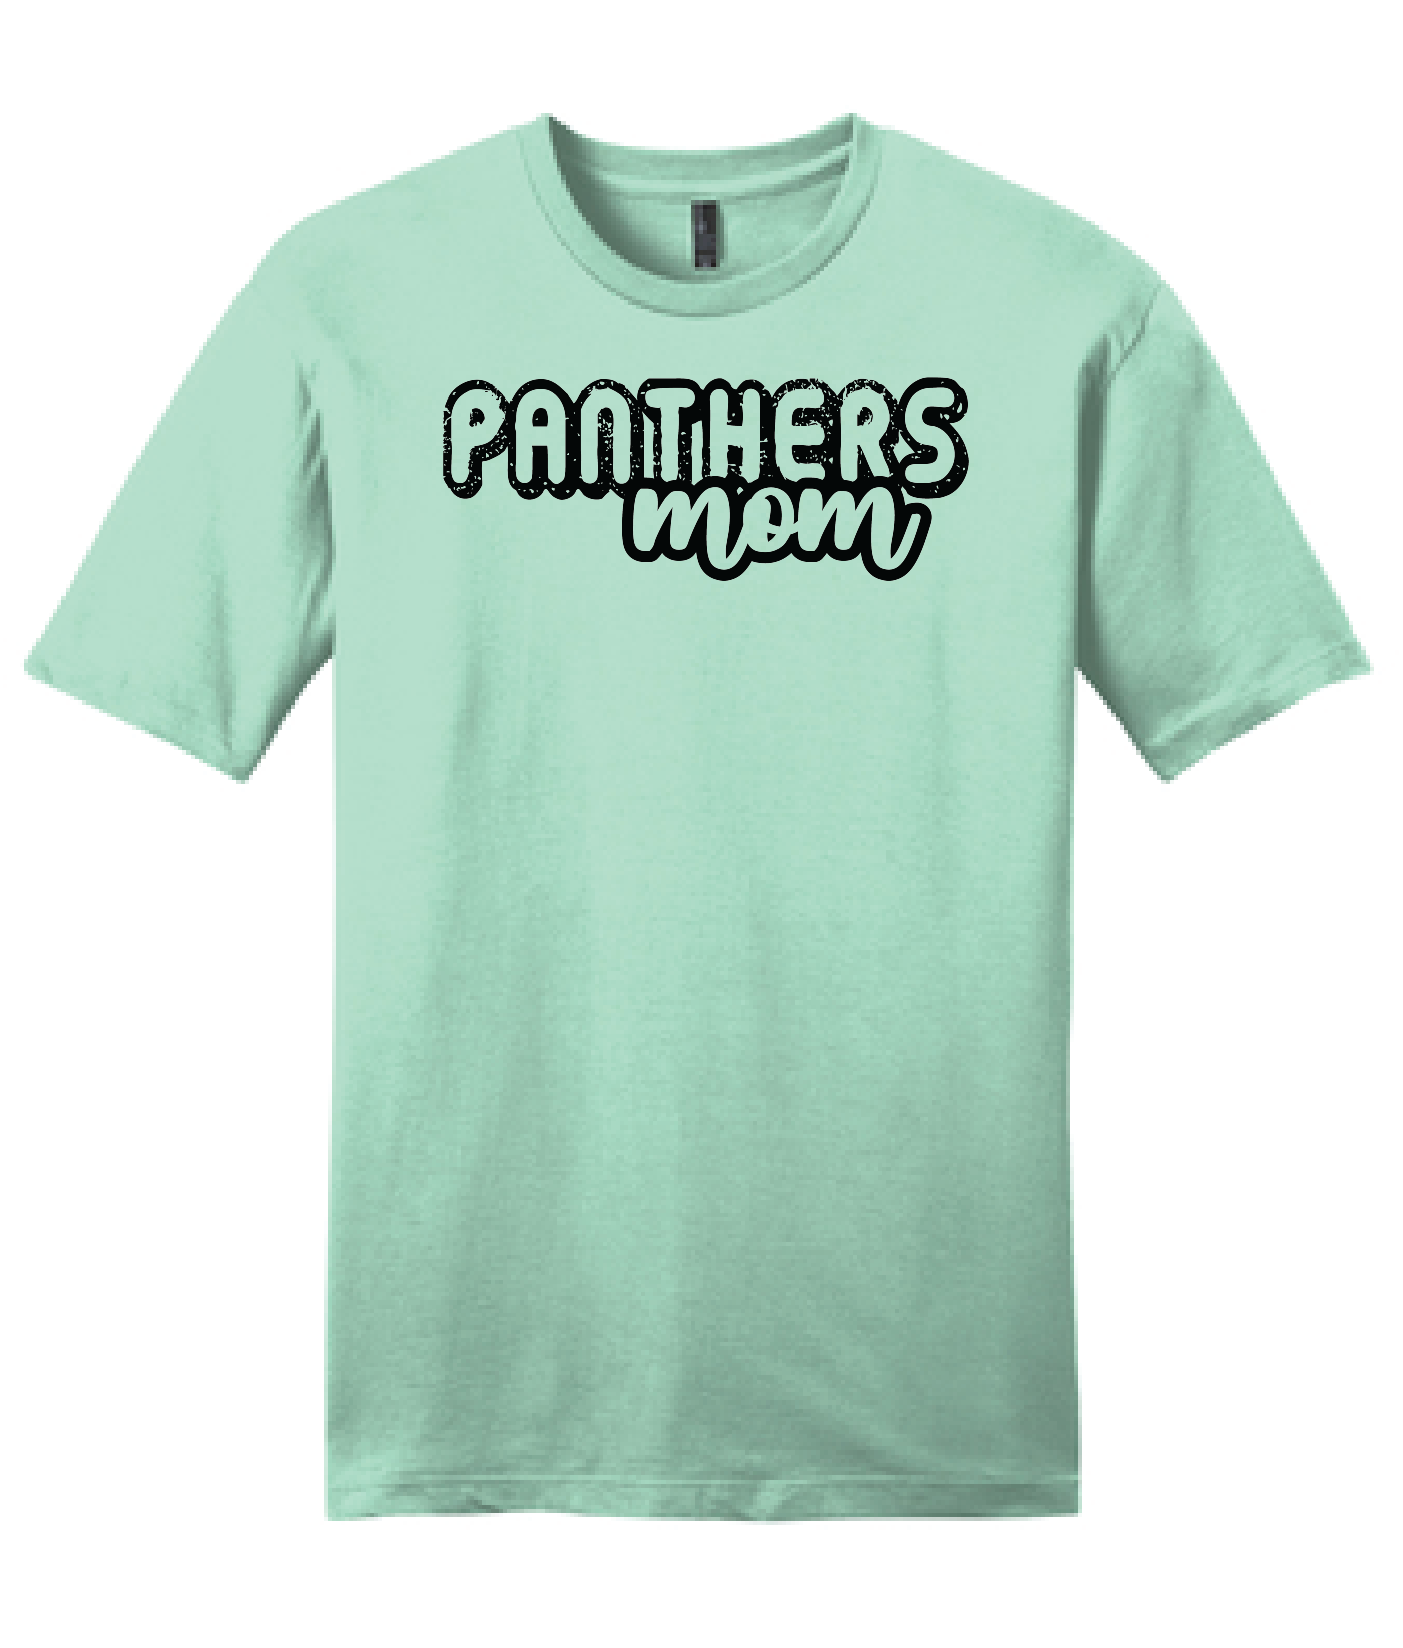 DC PANTHERS - PANTHER MOM TEE